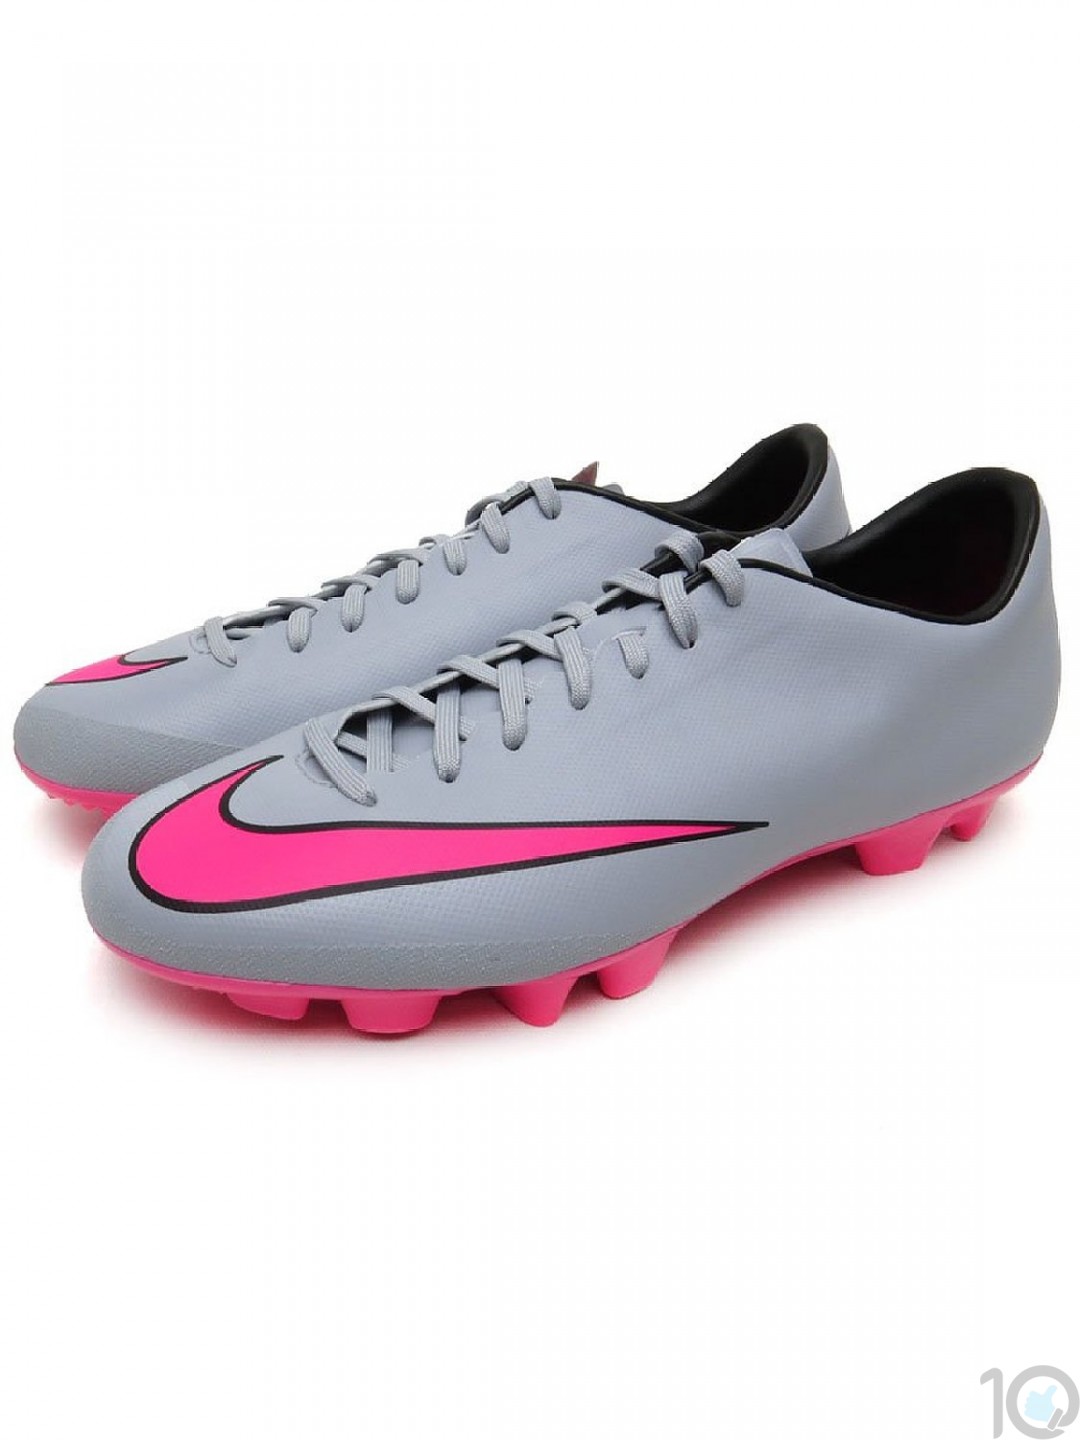 Buy Online India Nike 651645-060 Mens Mercurial Victory Wolf Greyhyper P Football Boots Online ...